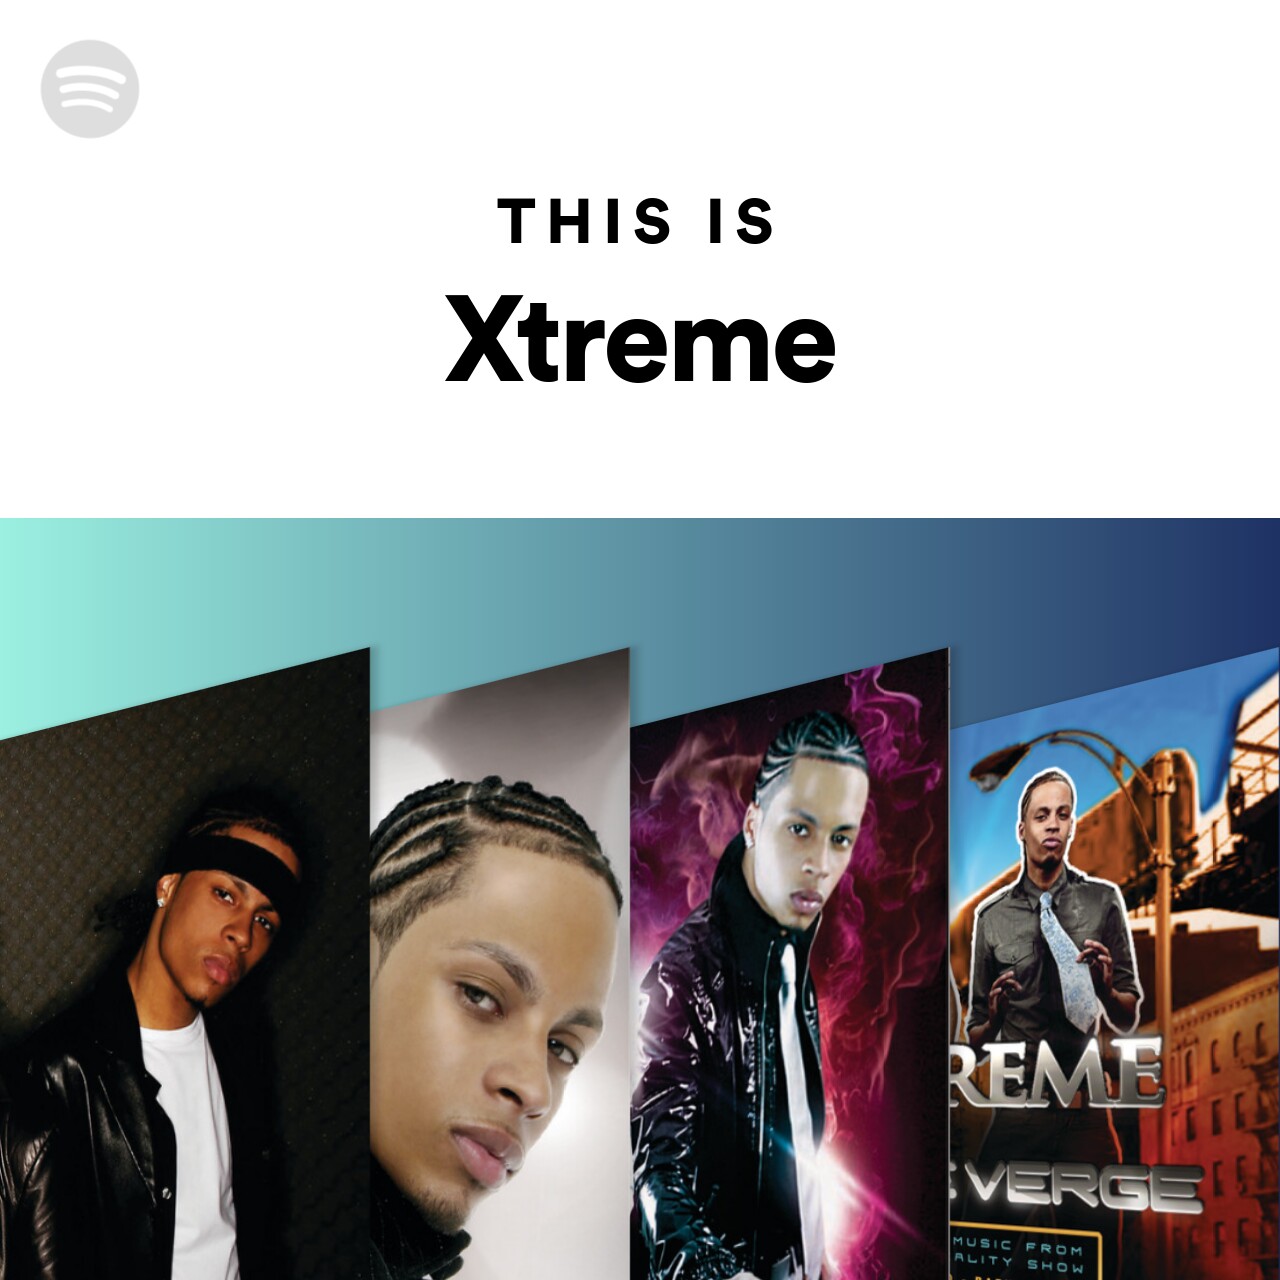 This Is Xtreme